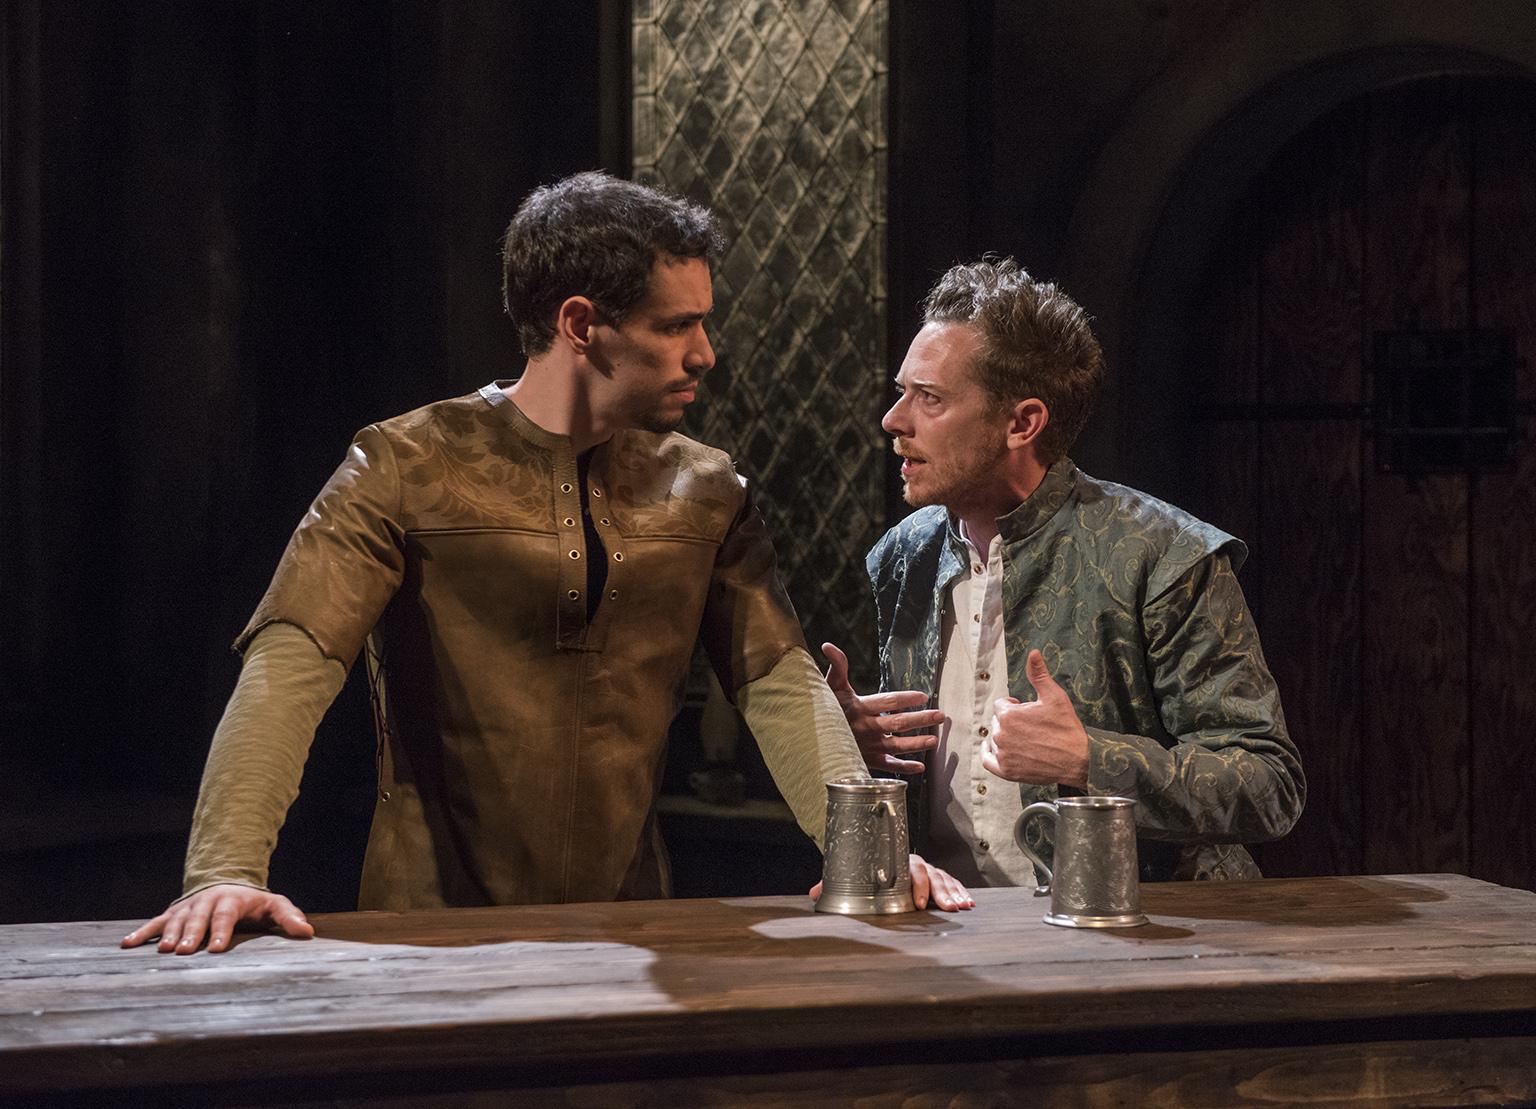 Ryan Hallahan, left, and Steve Haggard in “Witch” at Writers Theatre. (Photo credit: Michael Brosilow)